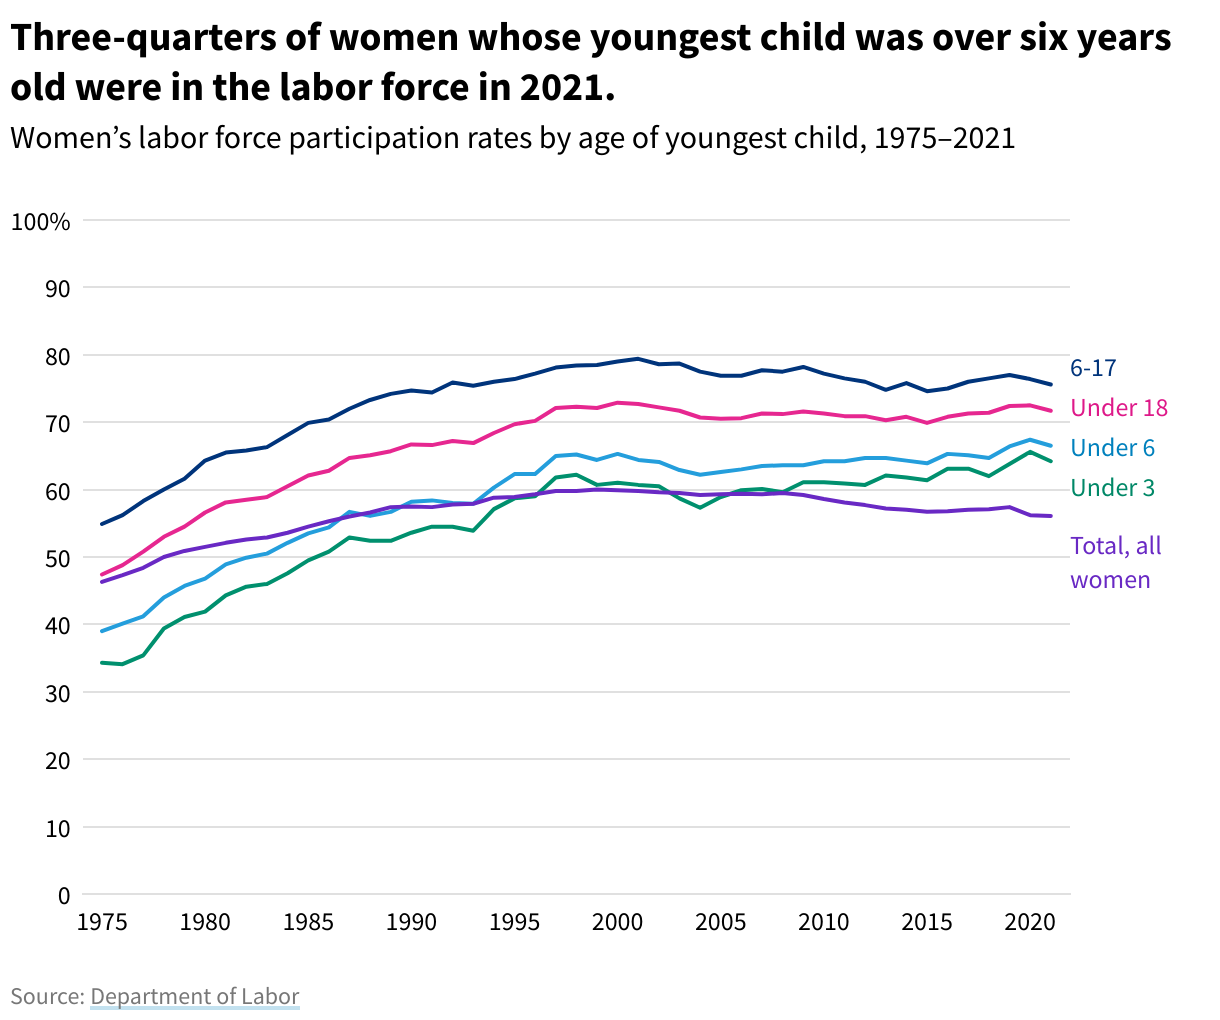 Line graph showing women’s labor force participation rates by age of youngest child, 1975–2021. Three-quarters of women whose youngest child was over six years old worked in 2021.